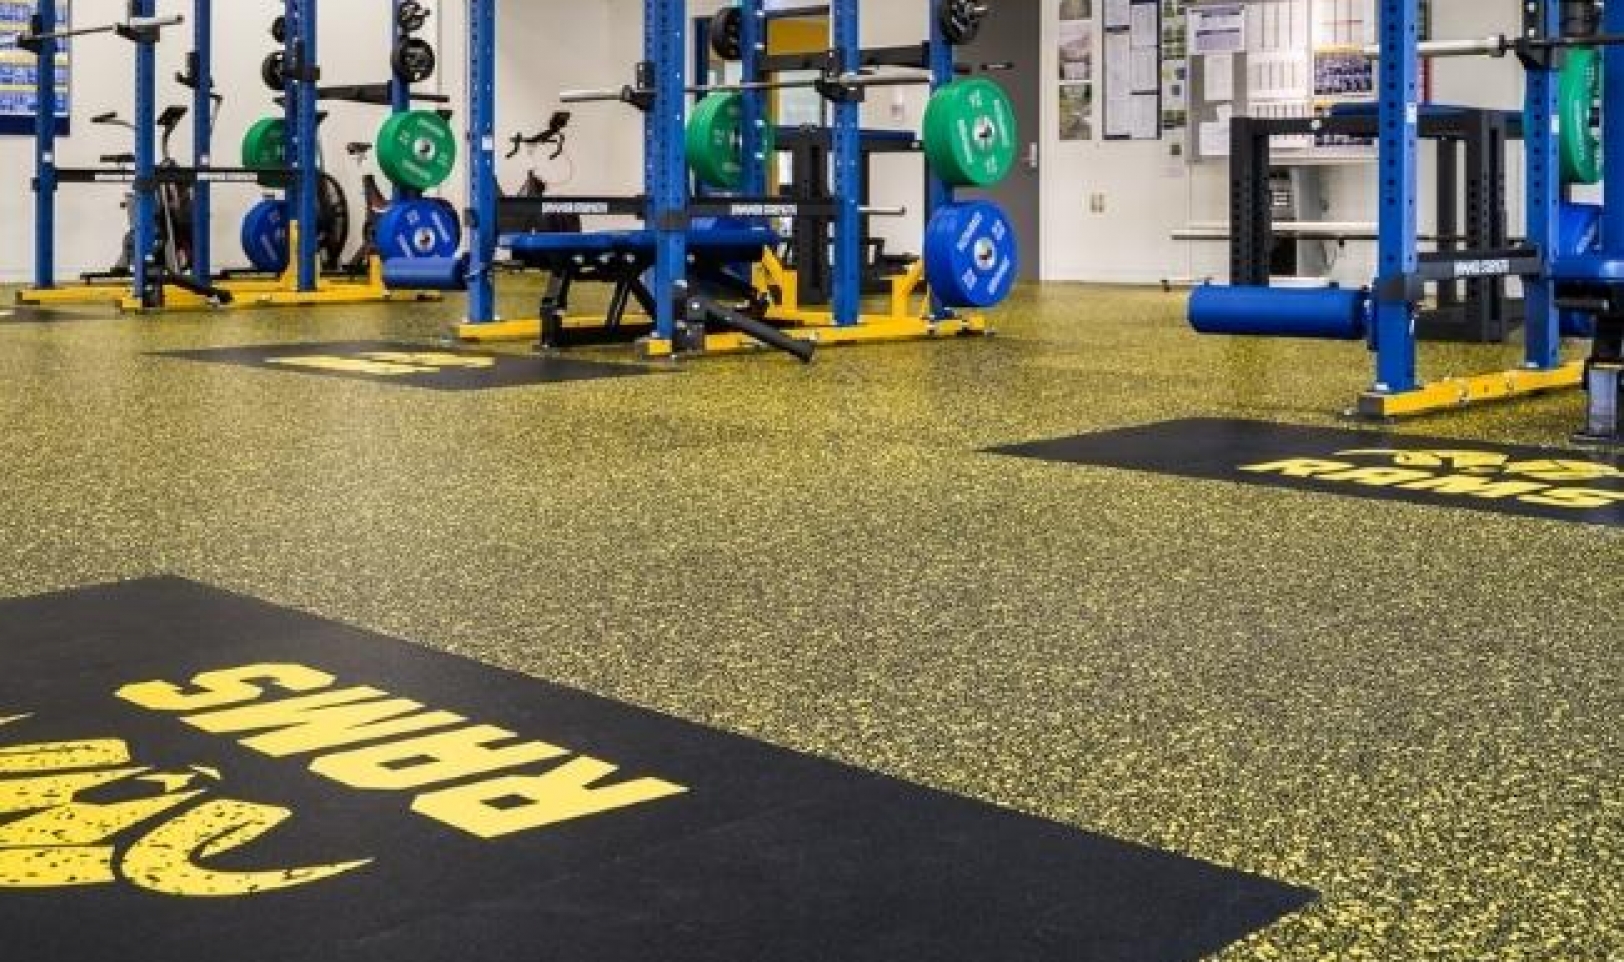 Lincoln University Gym - REPtiles Rubber Flooring